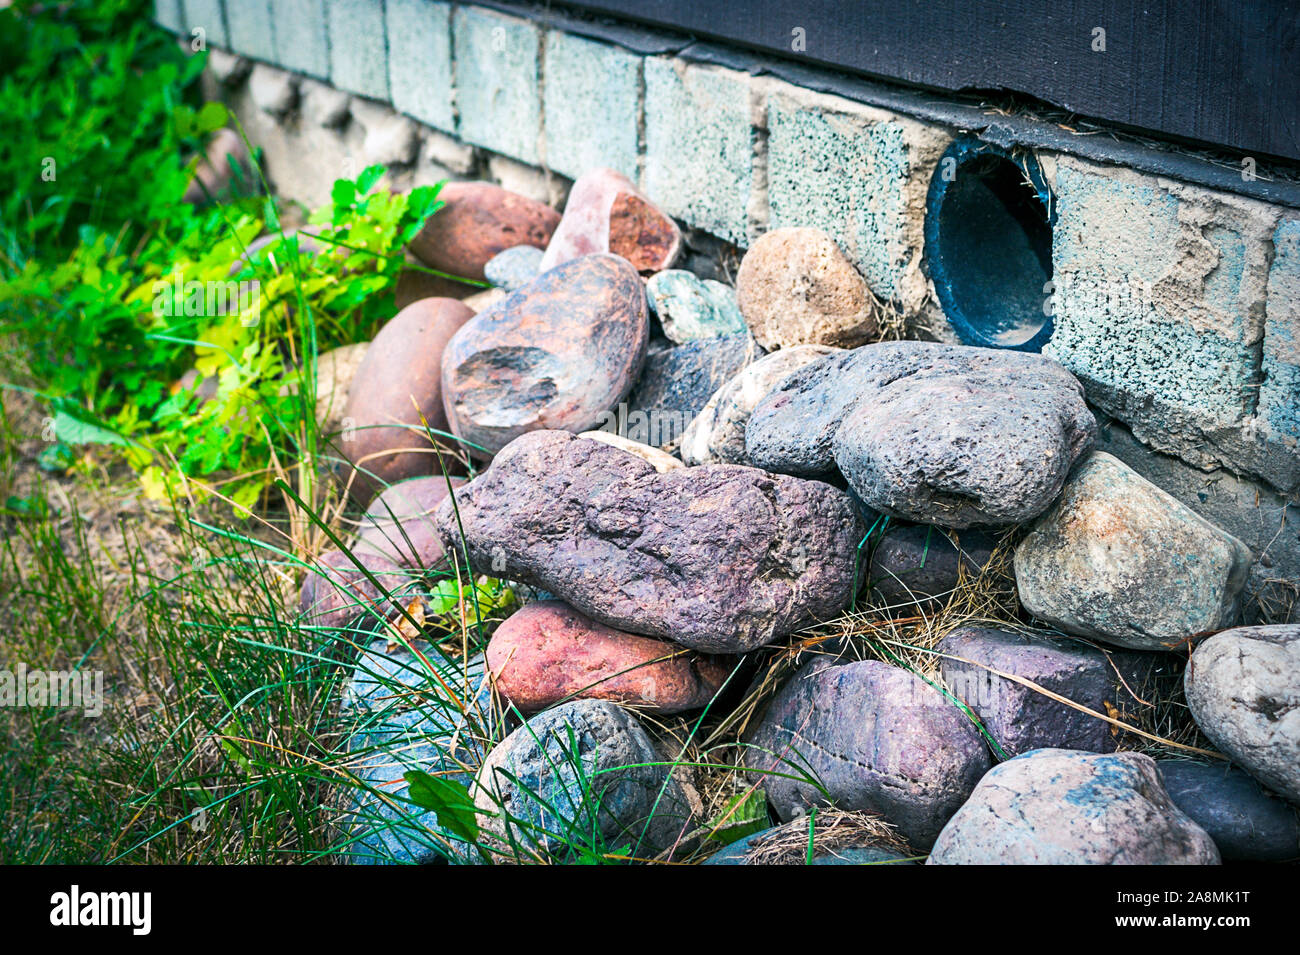 Pile of Colorful Boulders near a House Foundation with Plastic Pipe Vent to Ensure Air Circulation under the Floor and to Prevent Mildew and Rot. Stock Photo